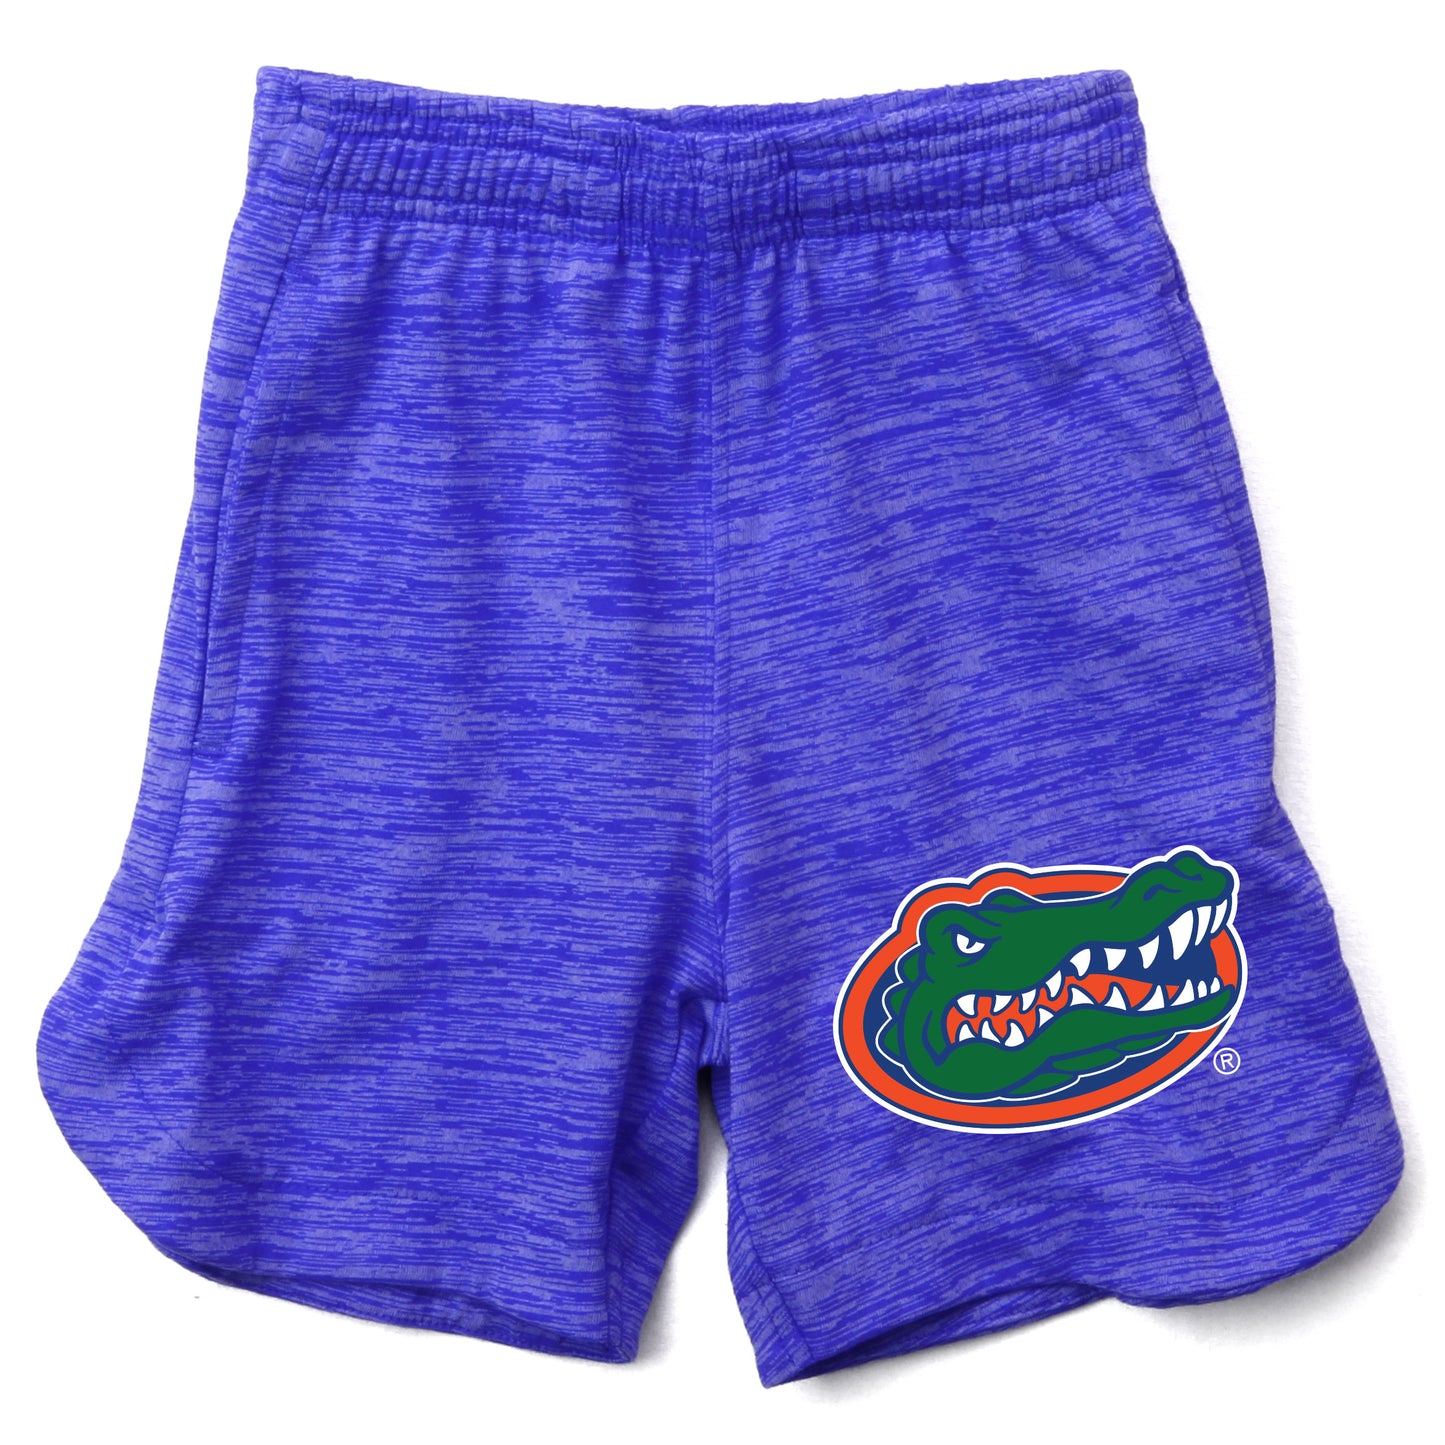 Florida Gators Youth Boys Wes and Willy Cloudy Yarn Shorts